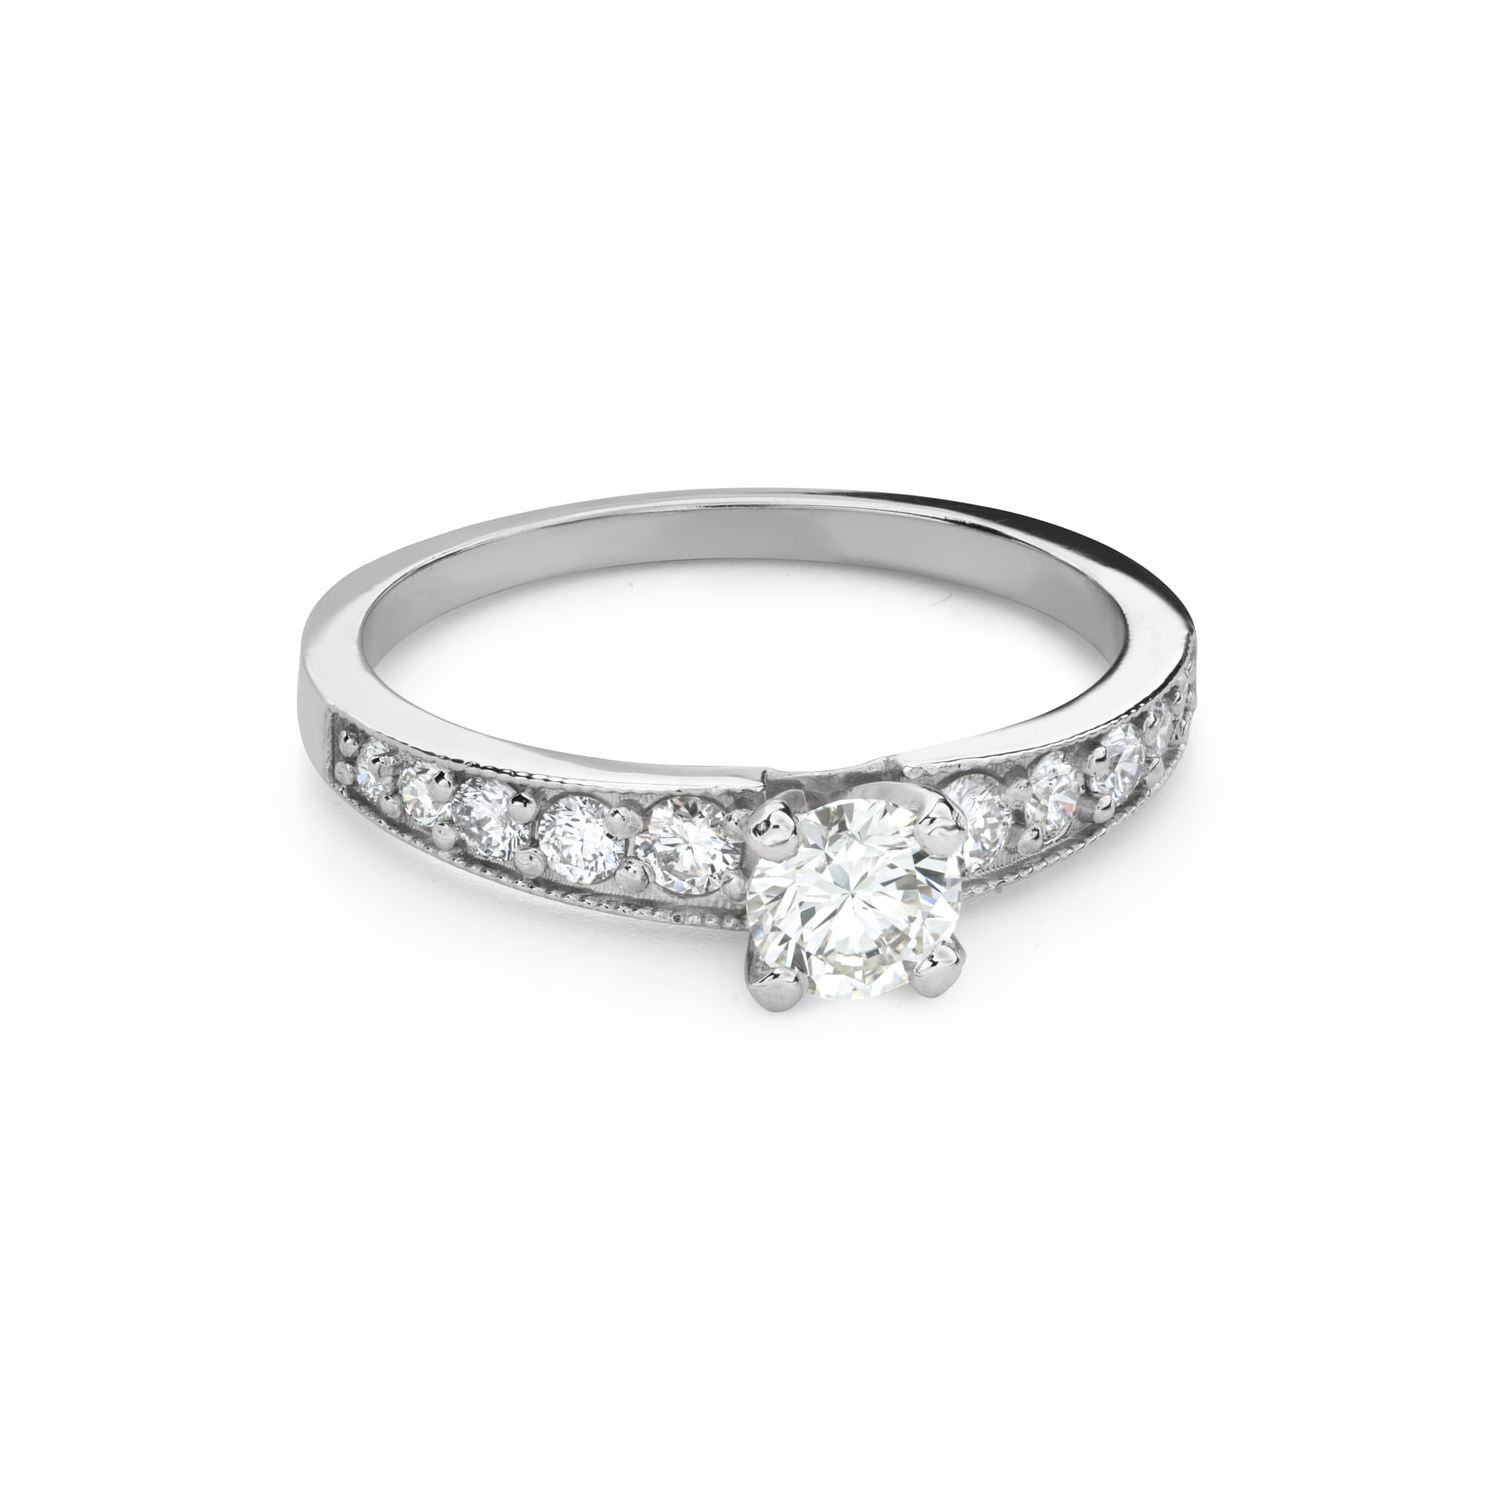 Engagment ring with brilliants "Grace 364"